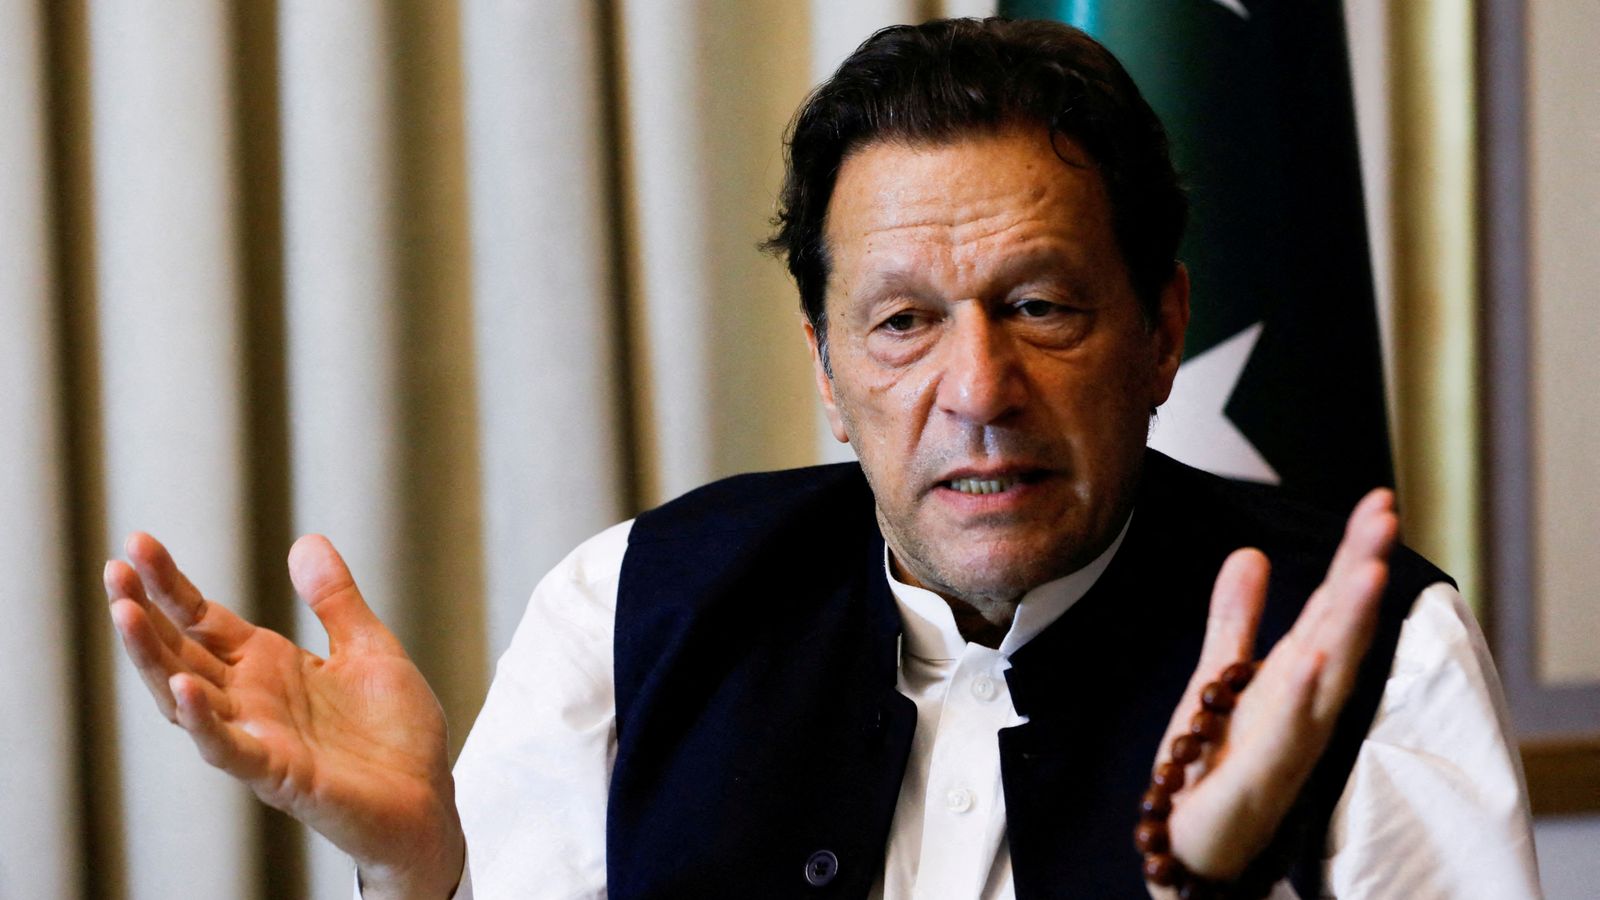 Jailed Imran Khan uses AI video to claim victory in Pakistan election - as army chief says nation needs 'stable hands'